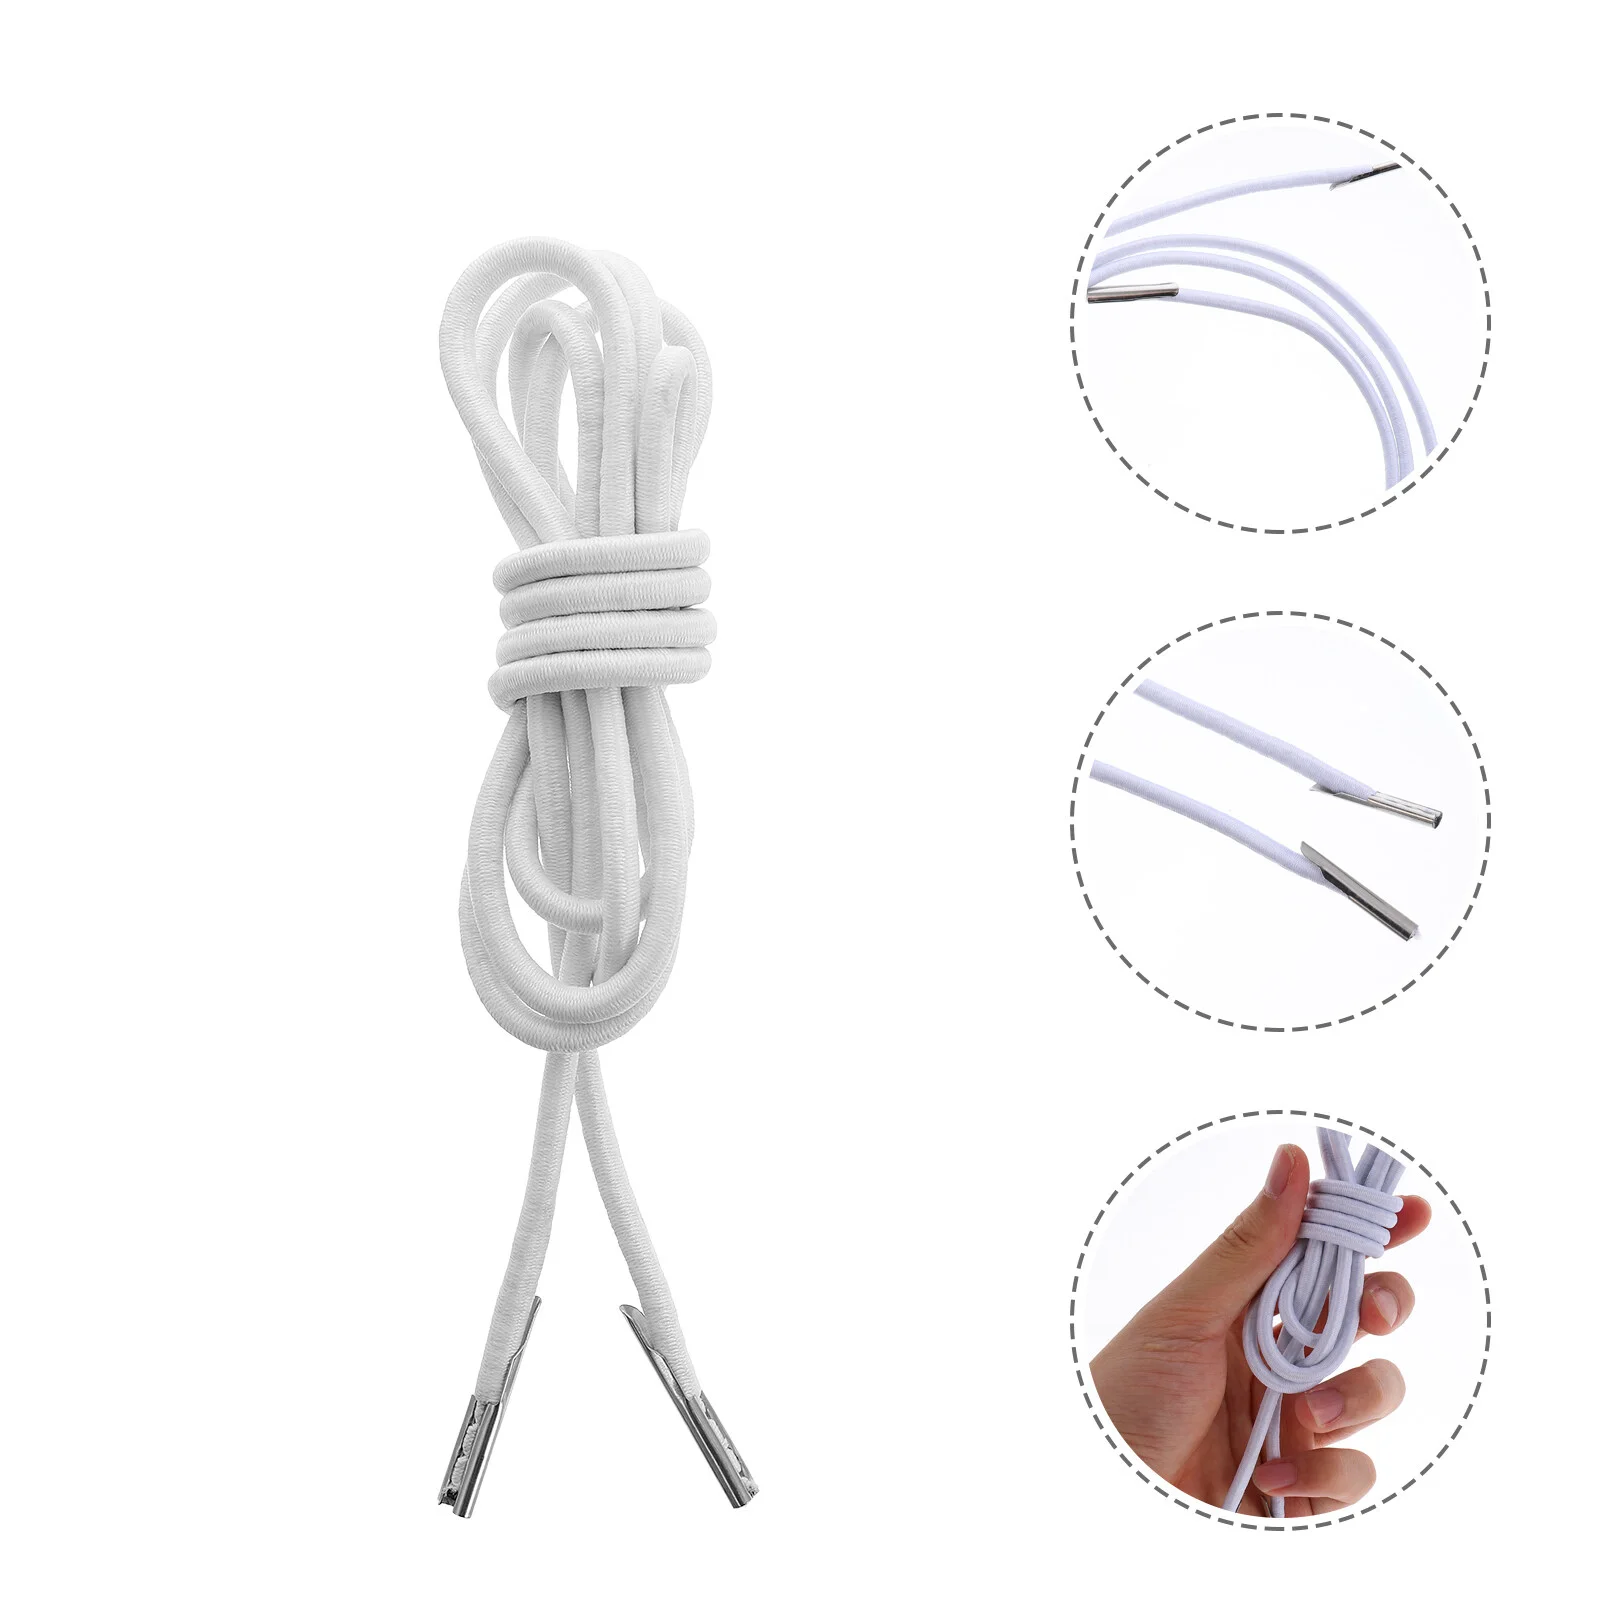 

4 Pcs Deck Lounge Chairs Chaise Longue Rope Accessories Replacement Cord Recliners Bungee Cords White Inner Core Latex Rubber